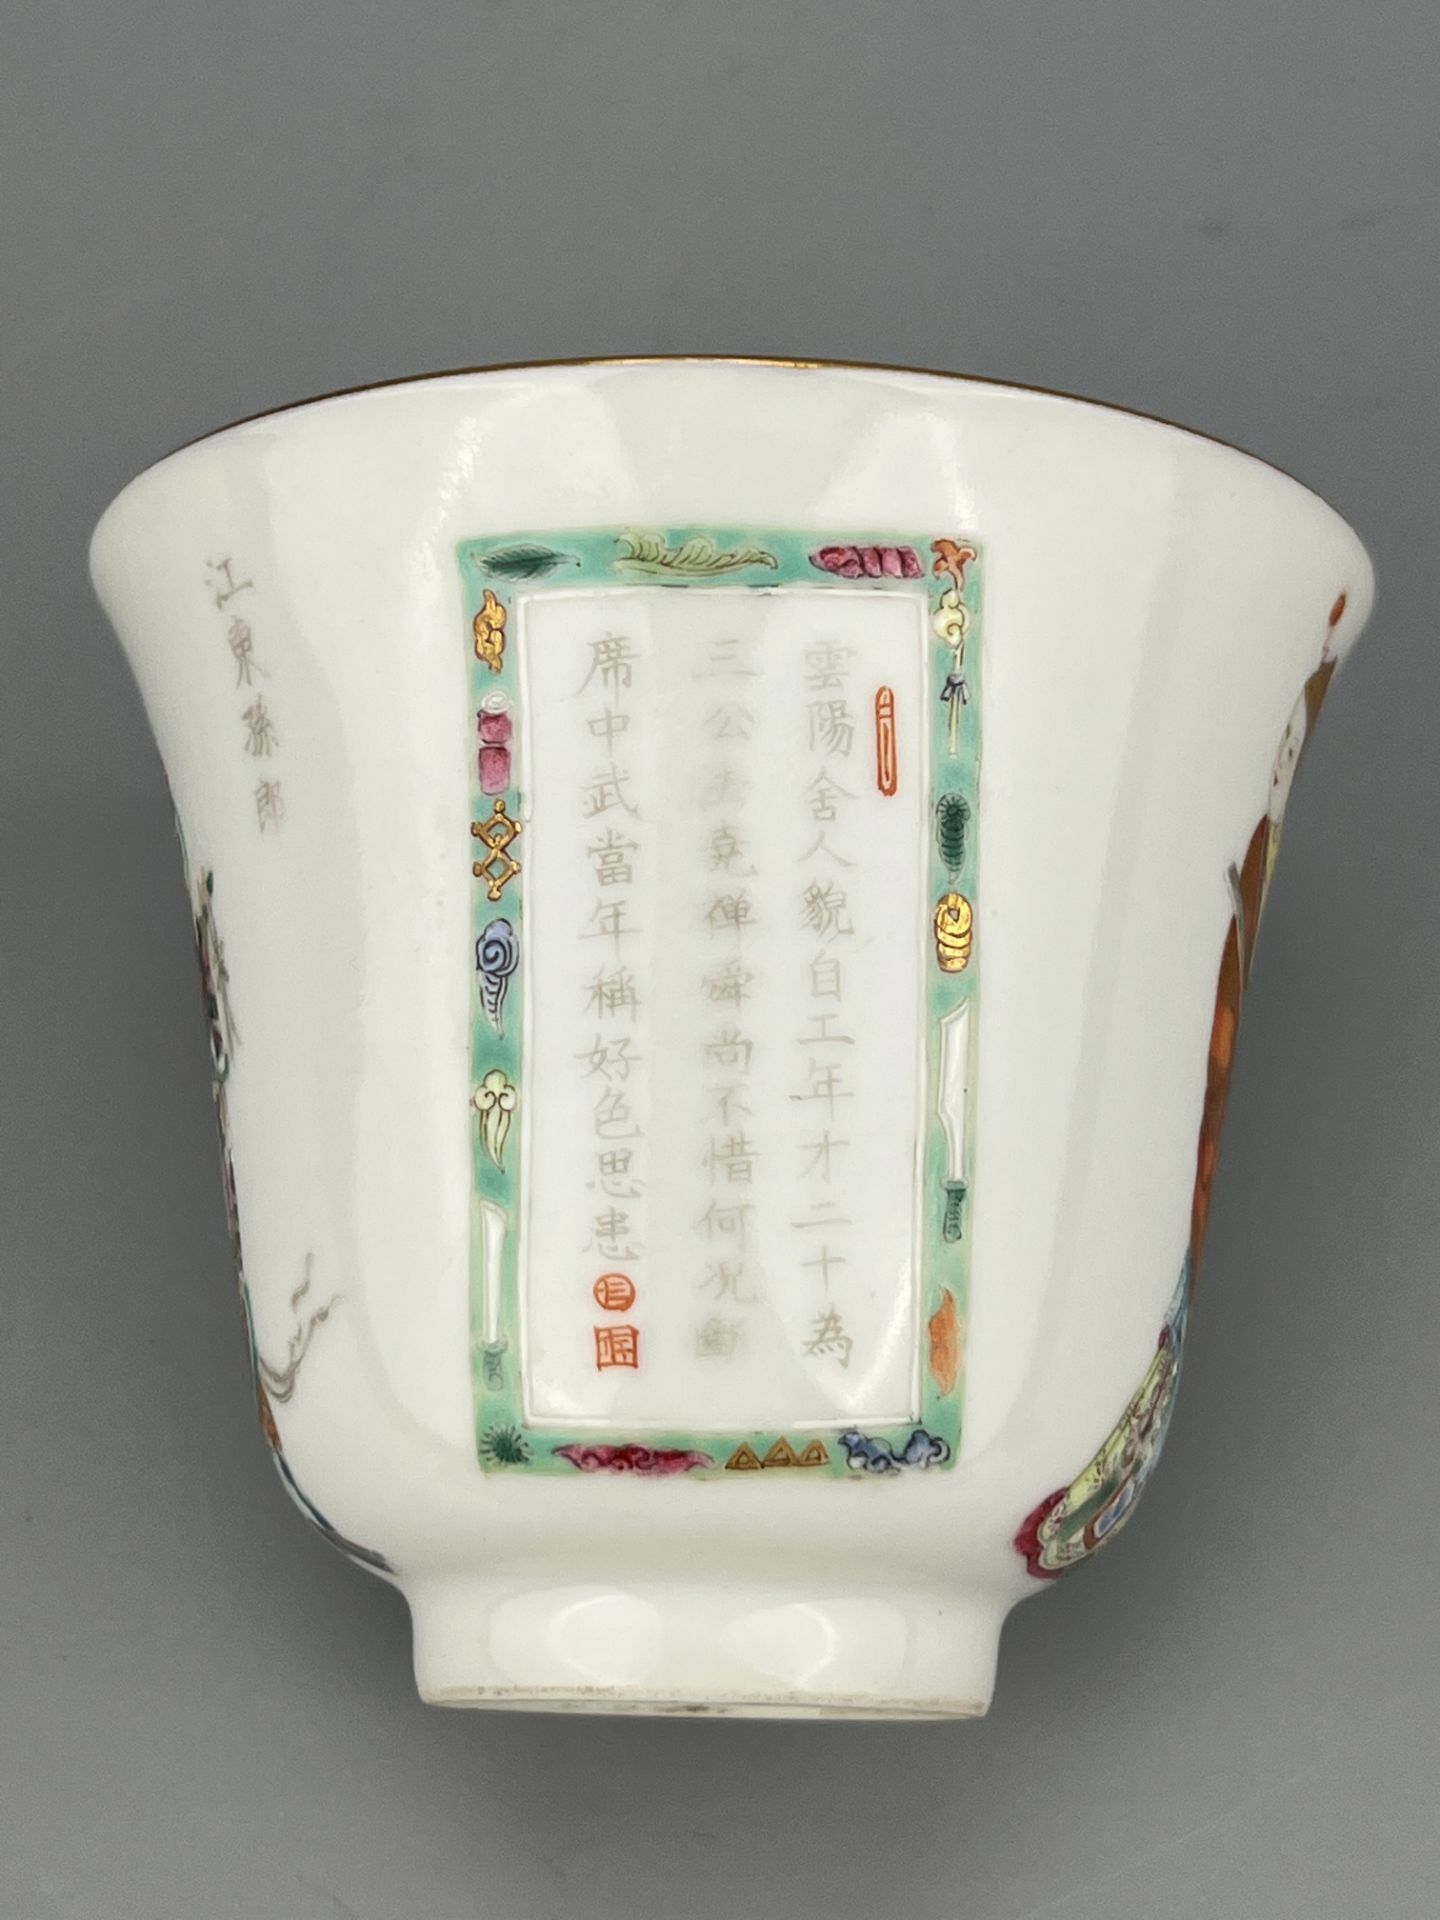 A Chinese nice story tell cup, Qing Dynastry Pr.  - Image 11 of 12